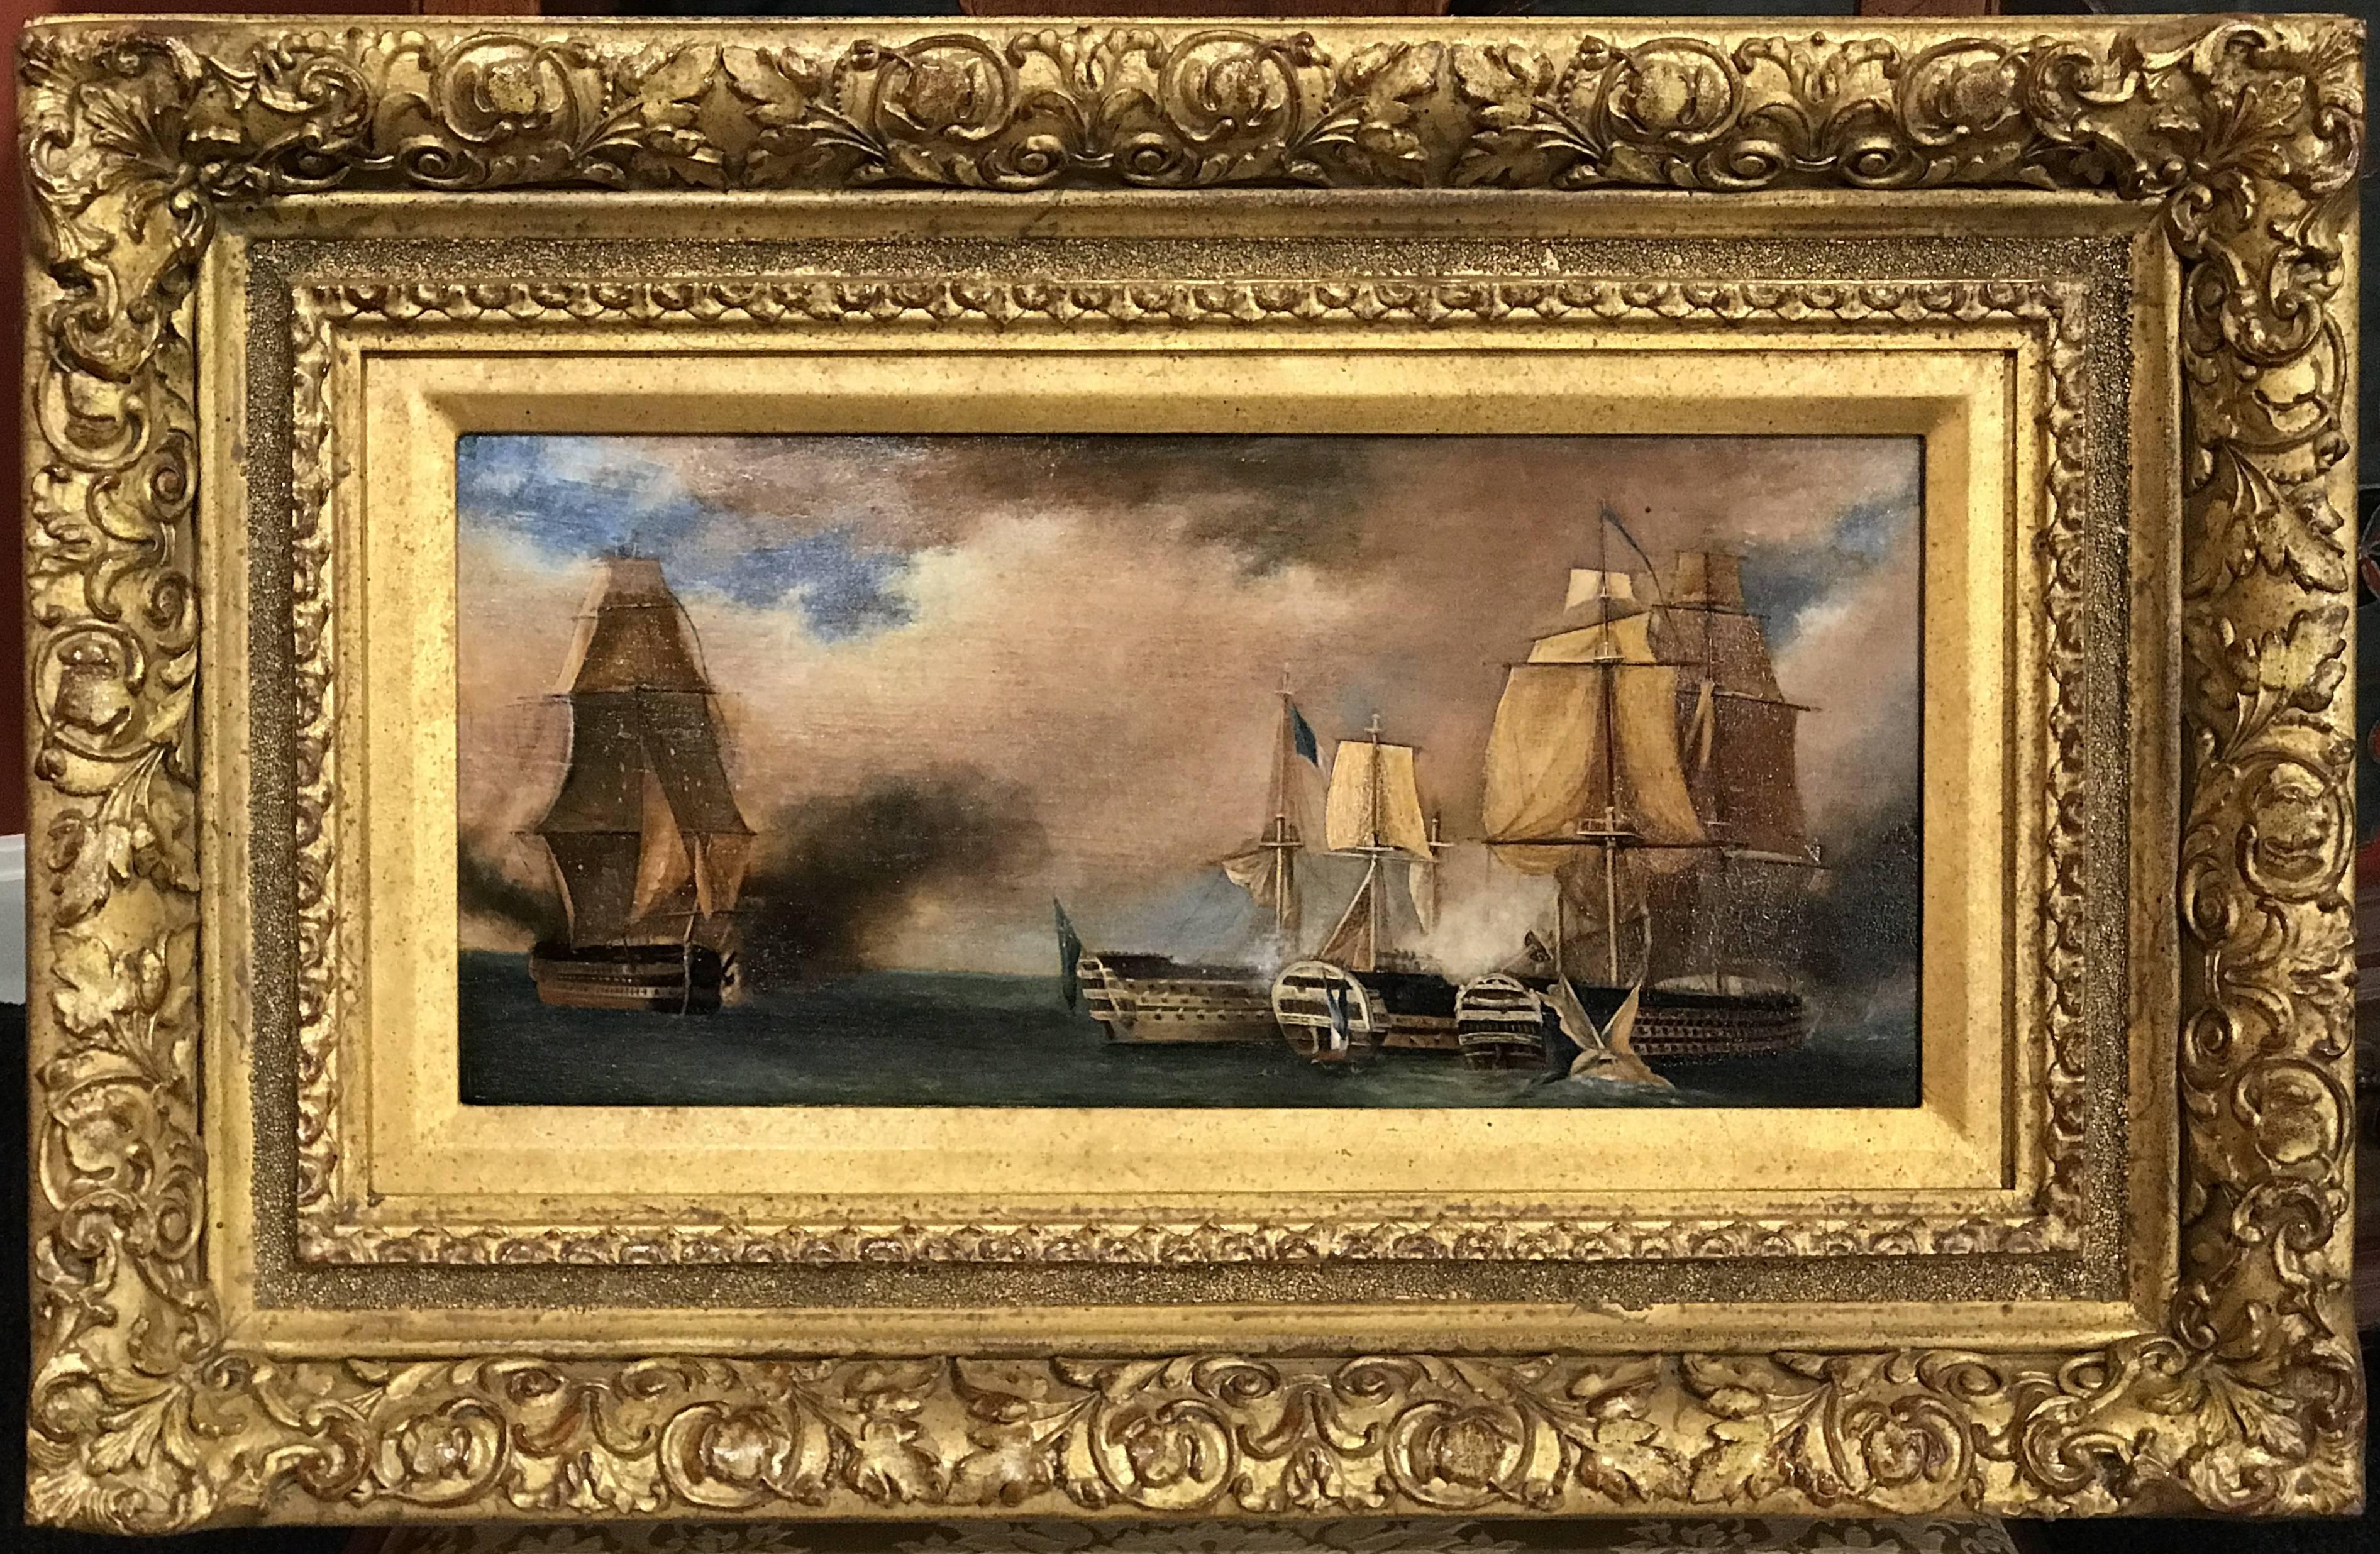 A wonderful pair of 19th century Continental marine oil paintings on panel depicting ship battle scenes under looming skies, unsigned, and framed in Fine scroll and foliate carved giltwood frames. Dimensions: Each measure 6.5 in. H x 13.75 in. W,